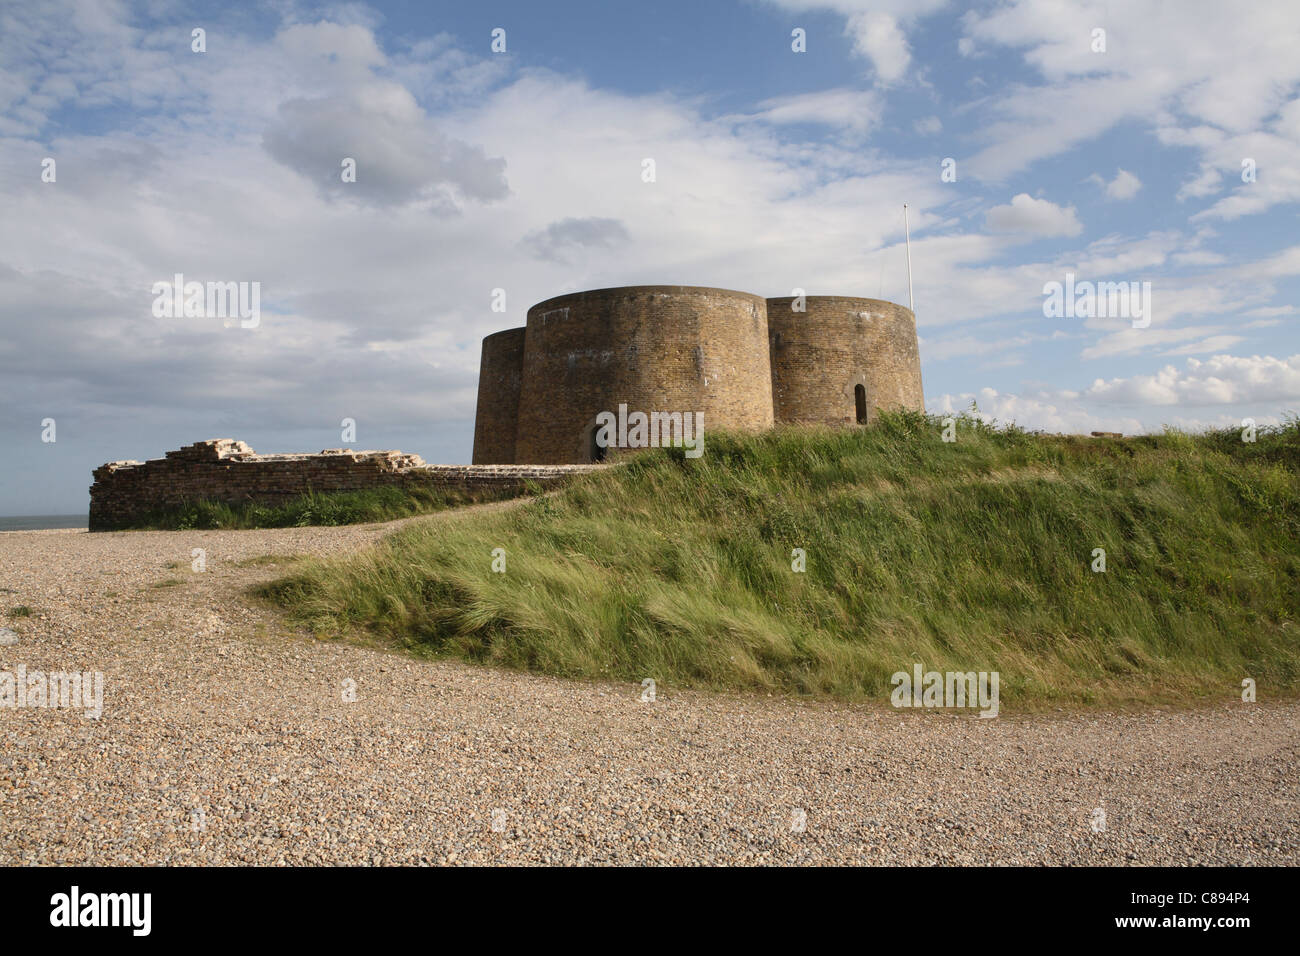 Martello Tower, Slaughden, Aldeburgh, Suffolk, now rented as a holiday let by the Landmark Trust. Evening sunshine and blue sky. Stock Photo